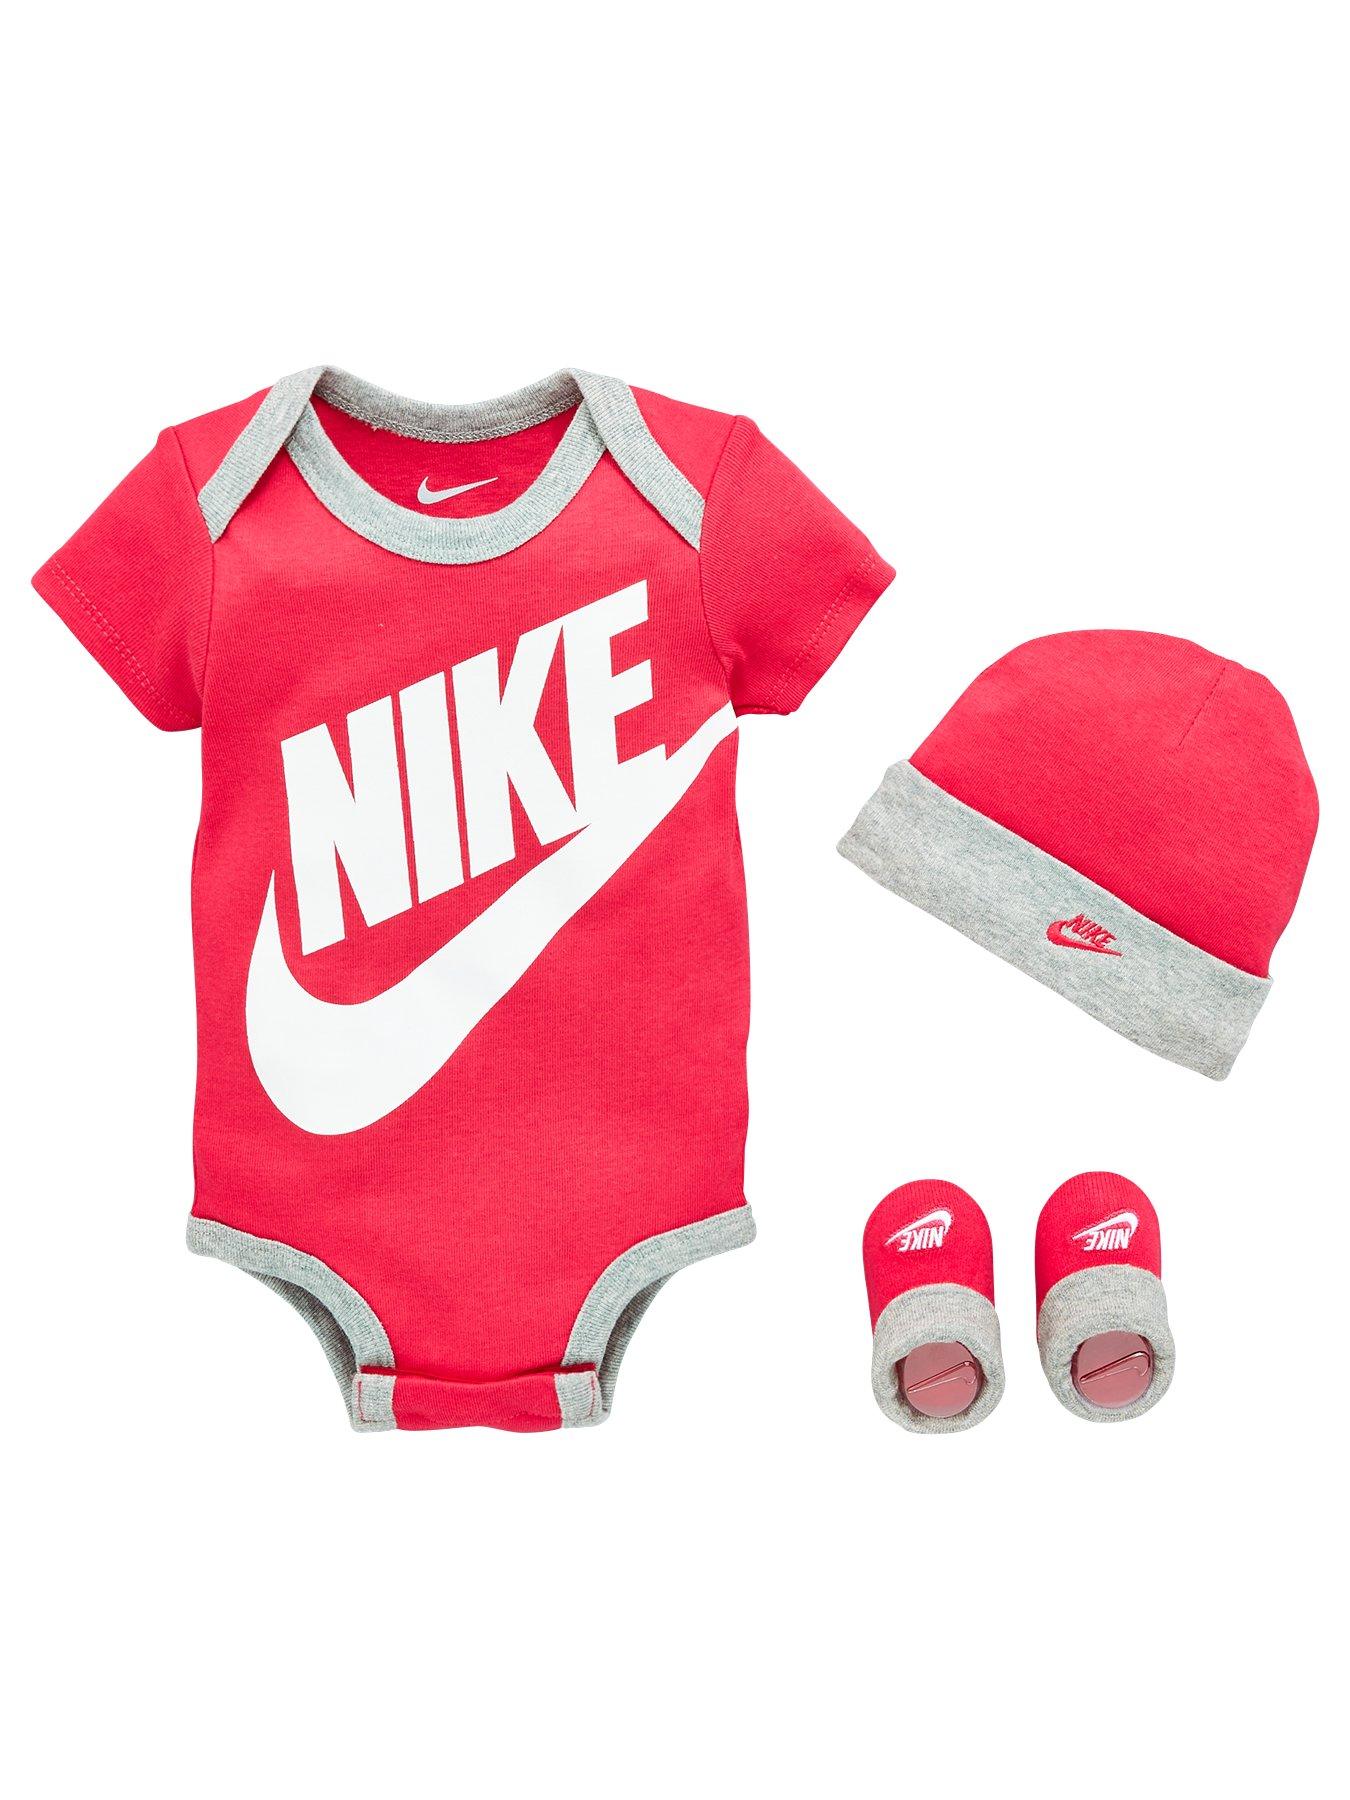 nike baby girl clothes 0 3 months